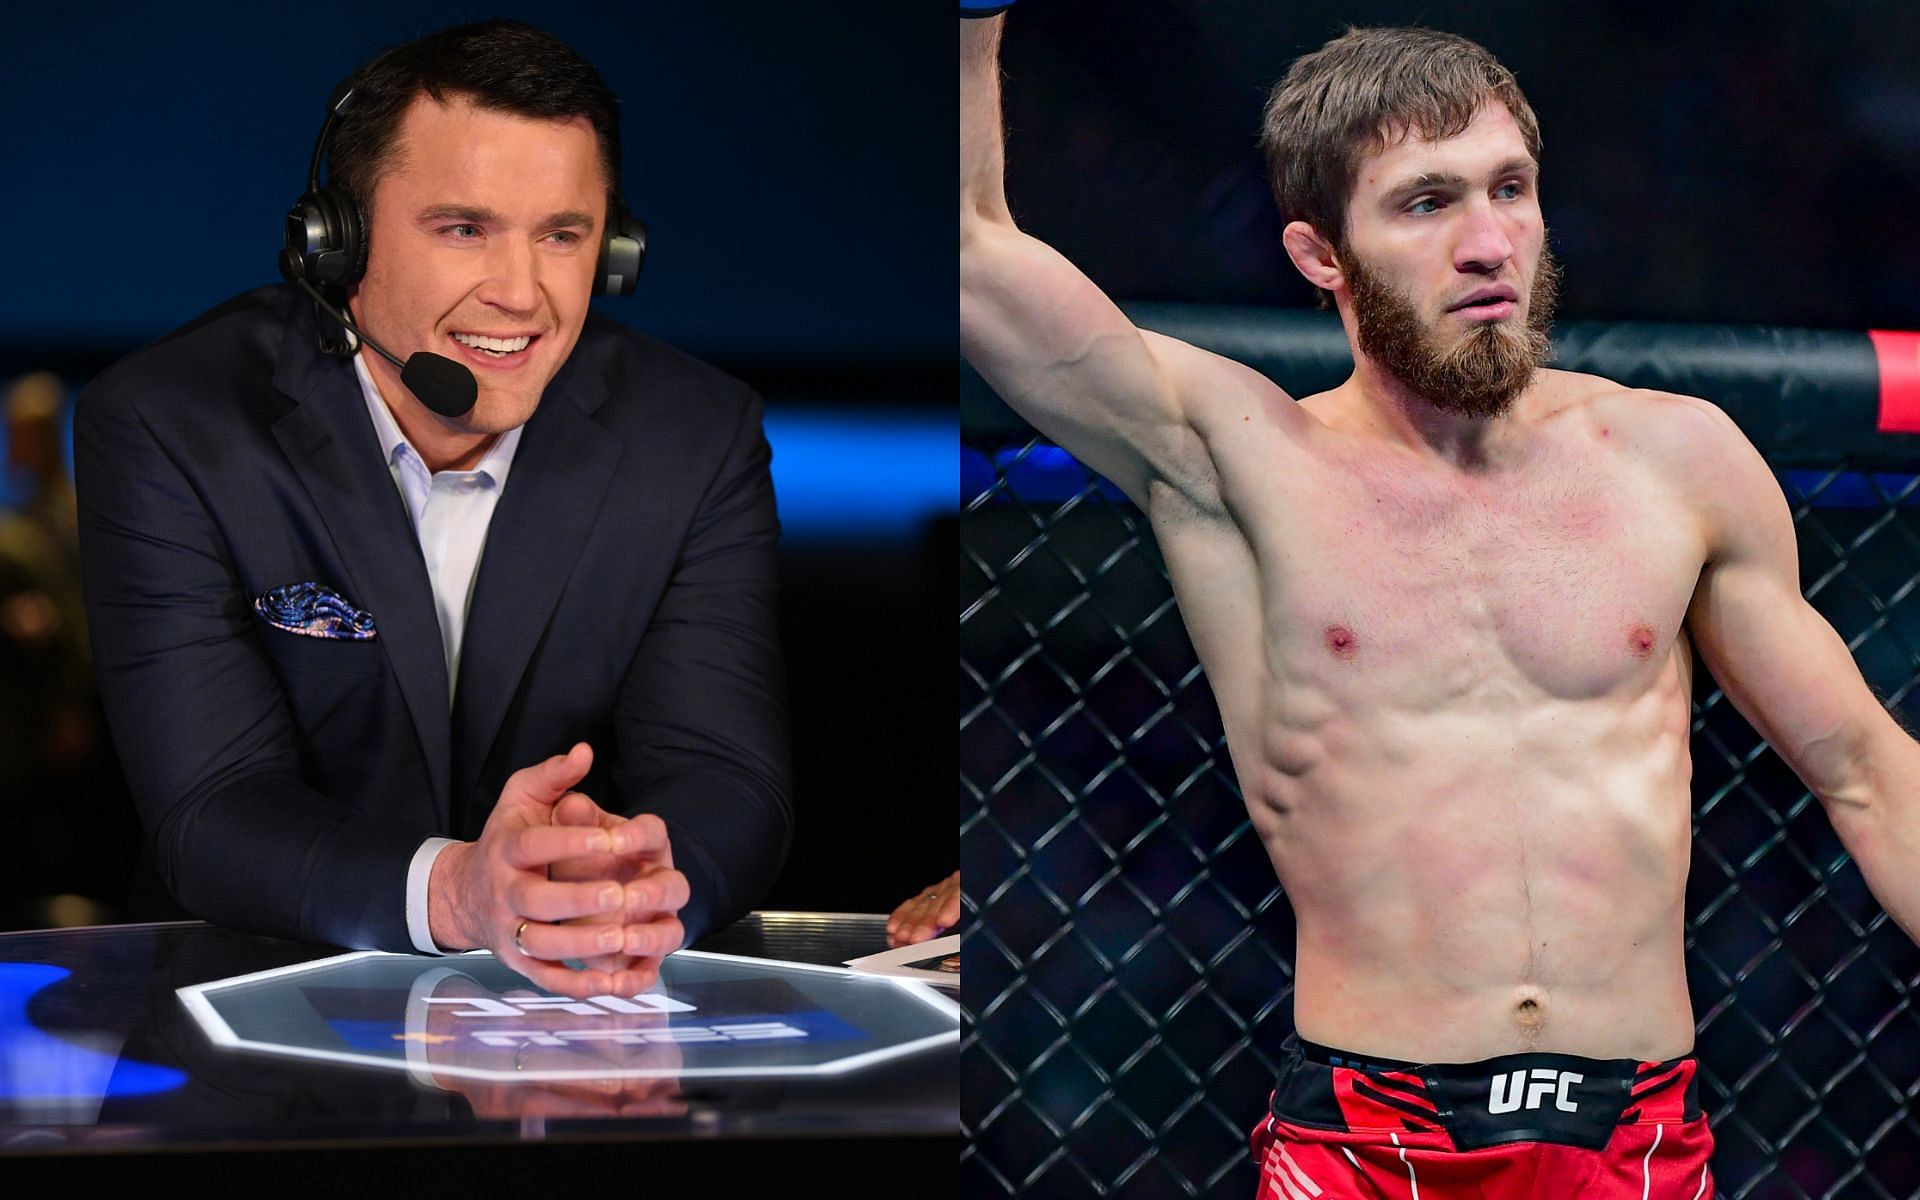 Chael Sonnen (L) feels Said Nurmagomedov (R) is the real deal